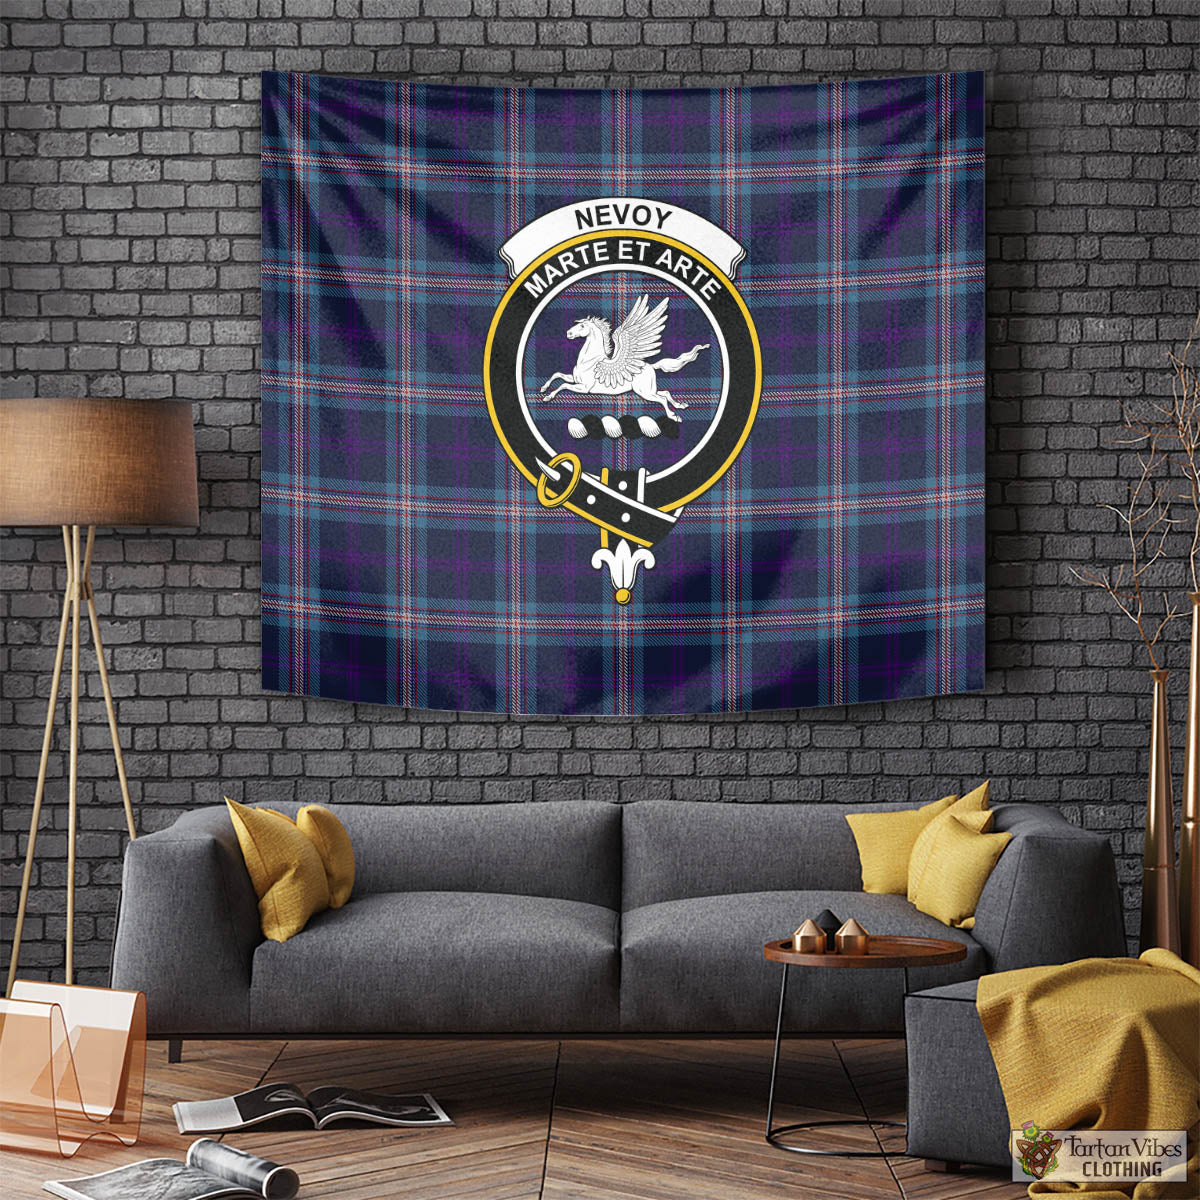 Tartan Vibes Clothing Nevoy Tartan Tapestry Wall Hanging and Home Decor for Room with Family Crest